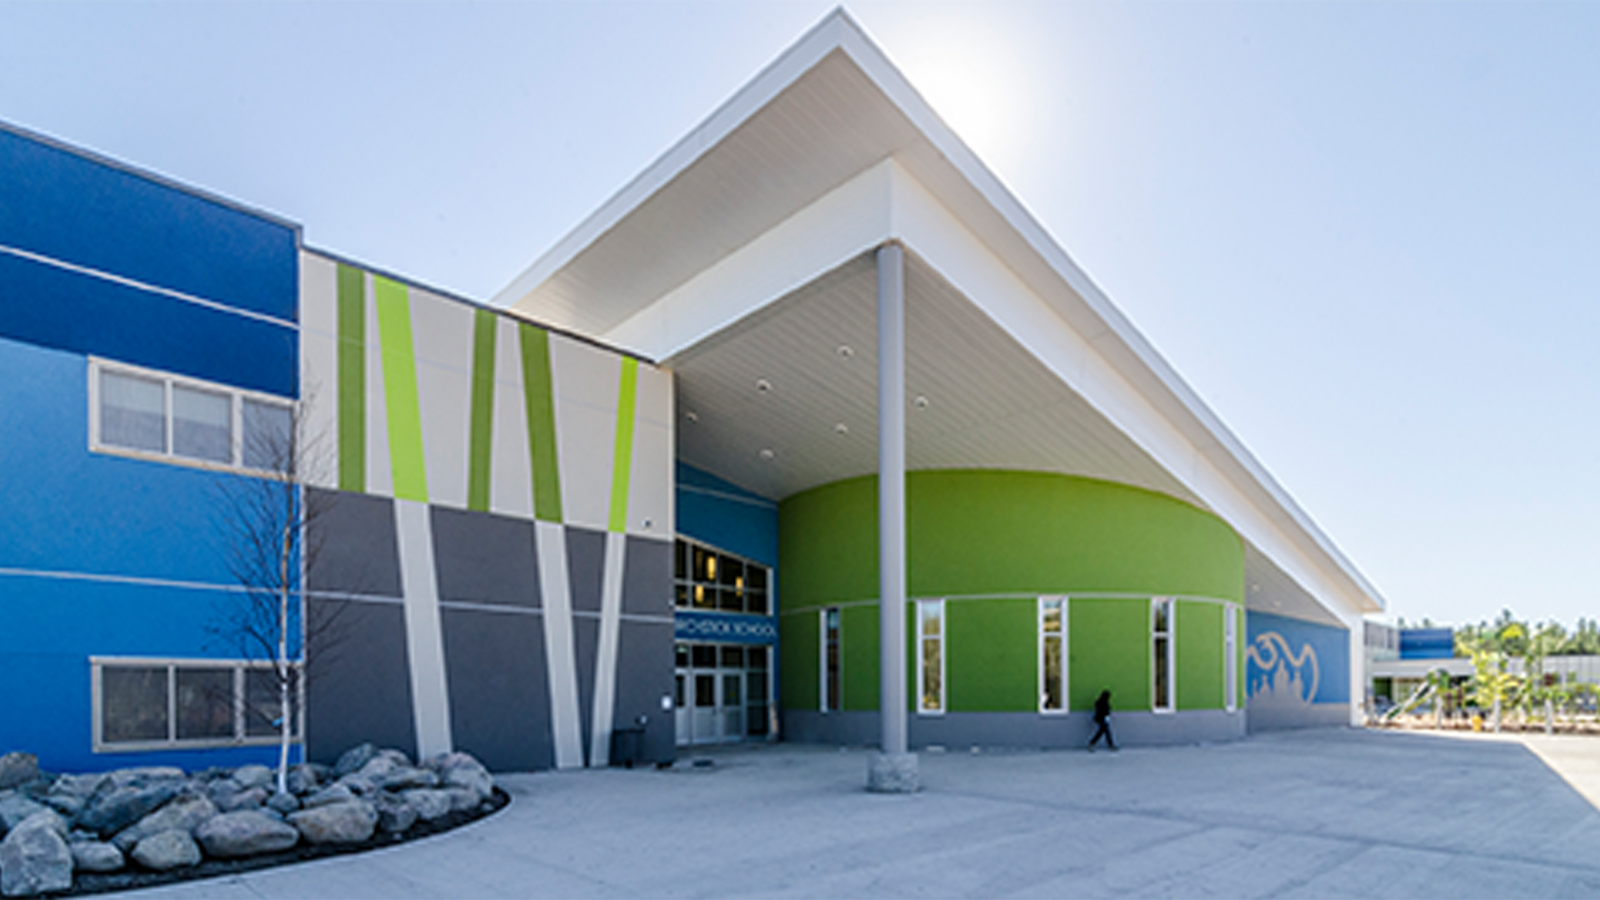 Large two-storey blue, grey, and green stucco building with a large, angled canopy stretching over the entrance.